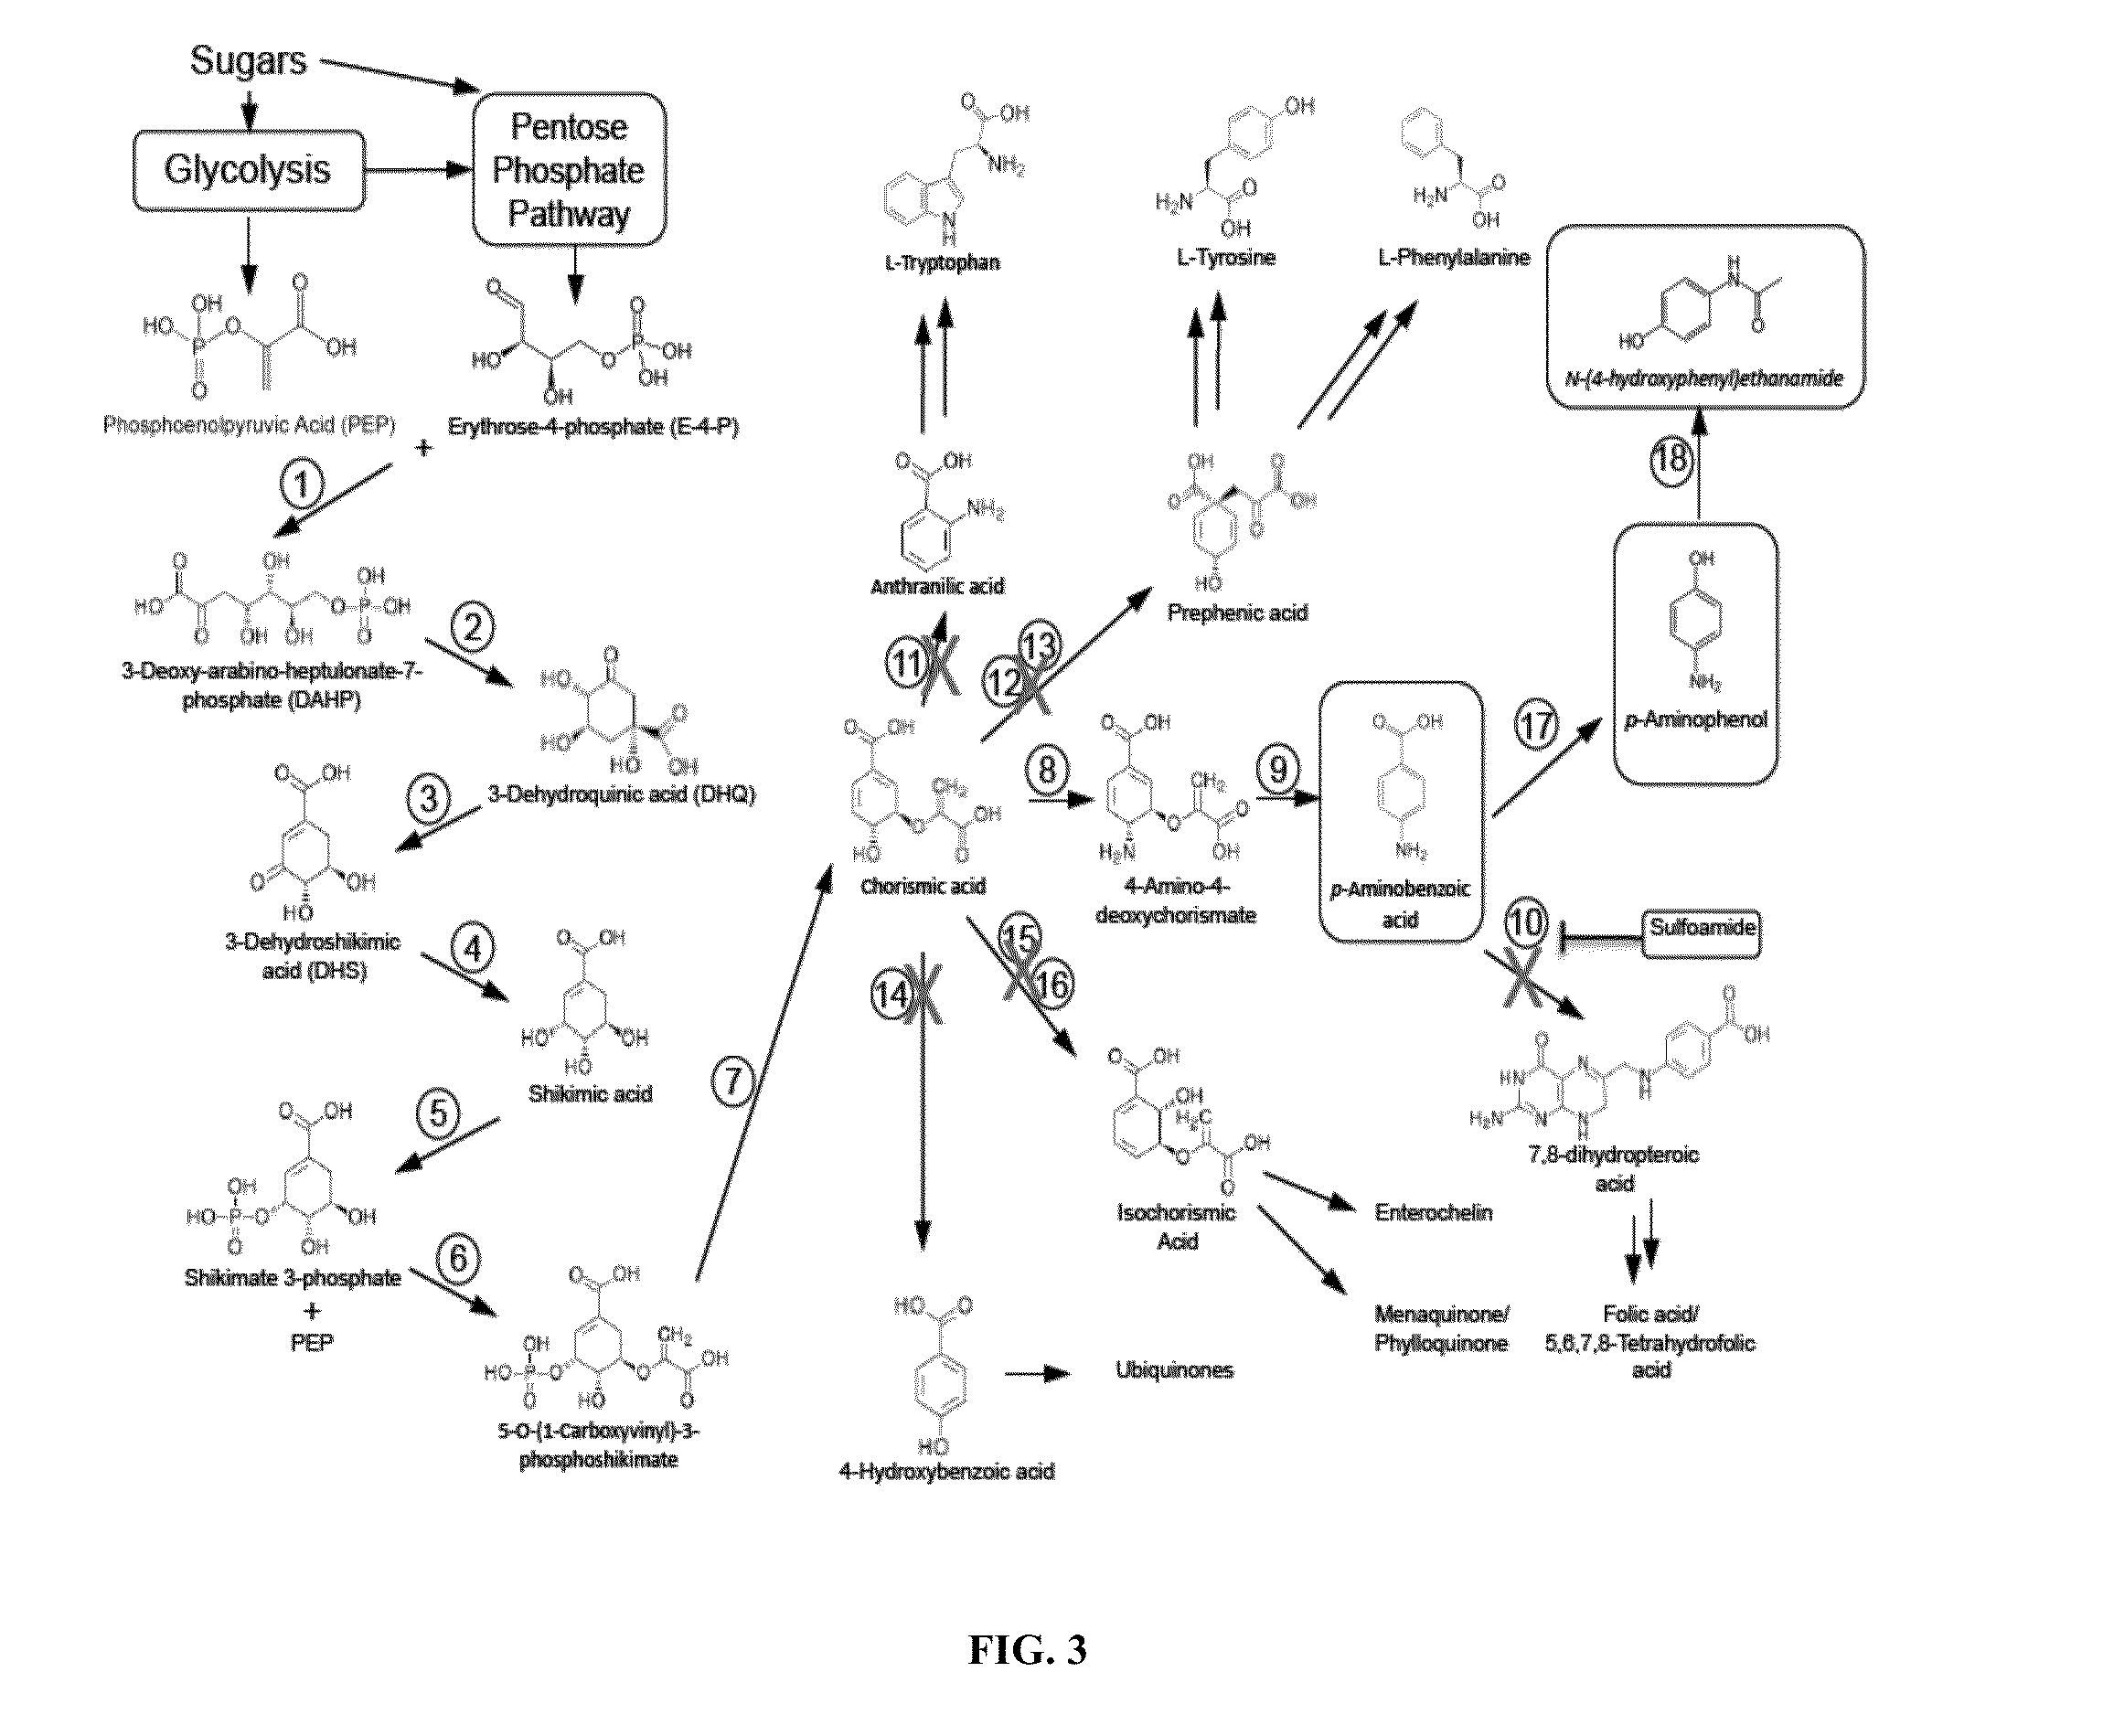 Biological synthesis of p-aminobenzoic acid, p-aminophenol, n-(4-hydroxyphenyl)ethanamide and derivatives thereof